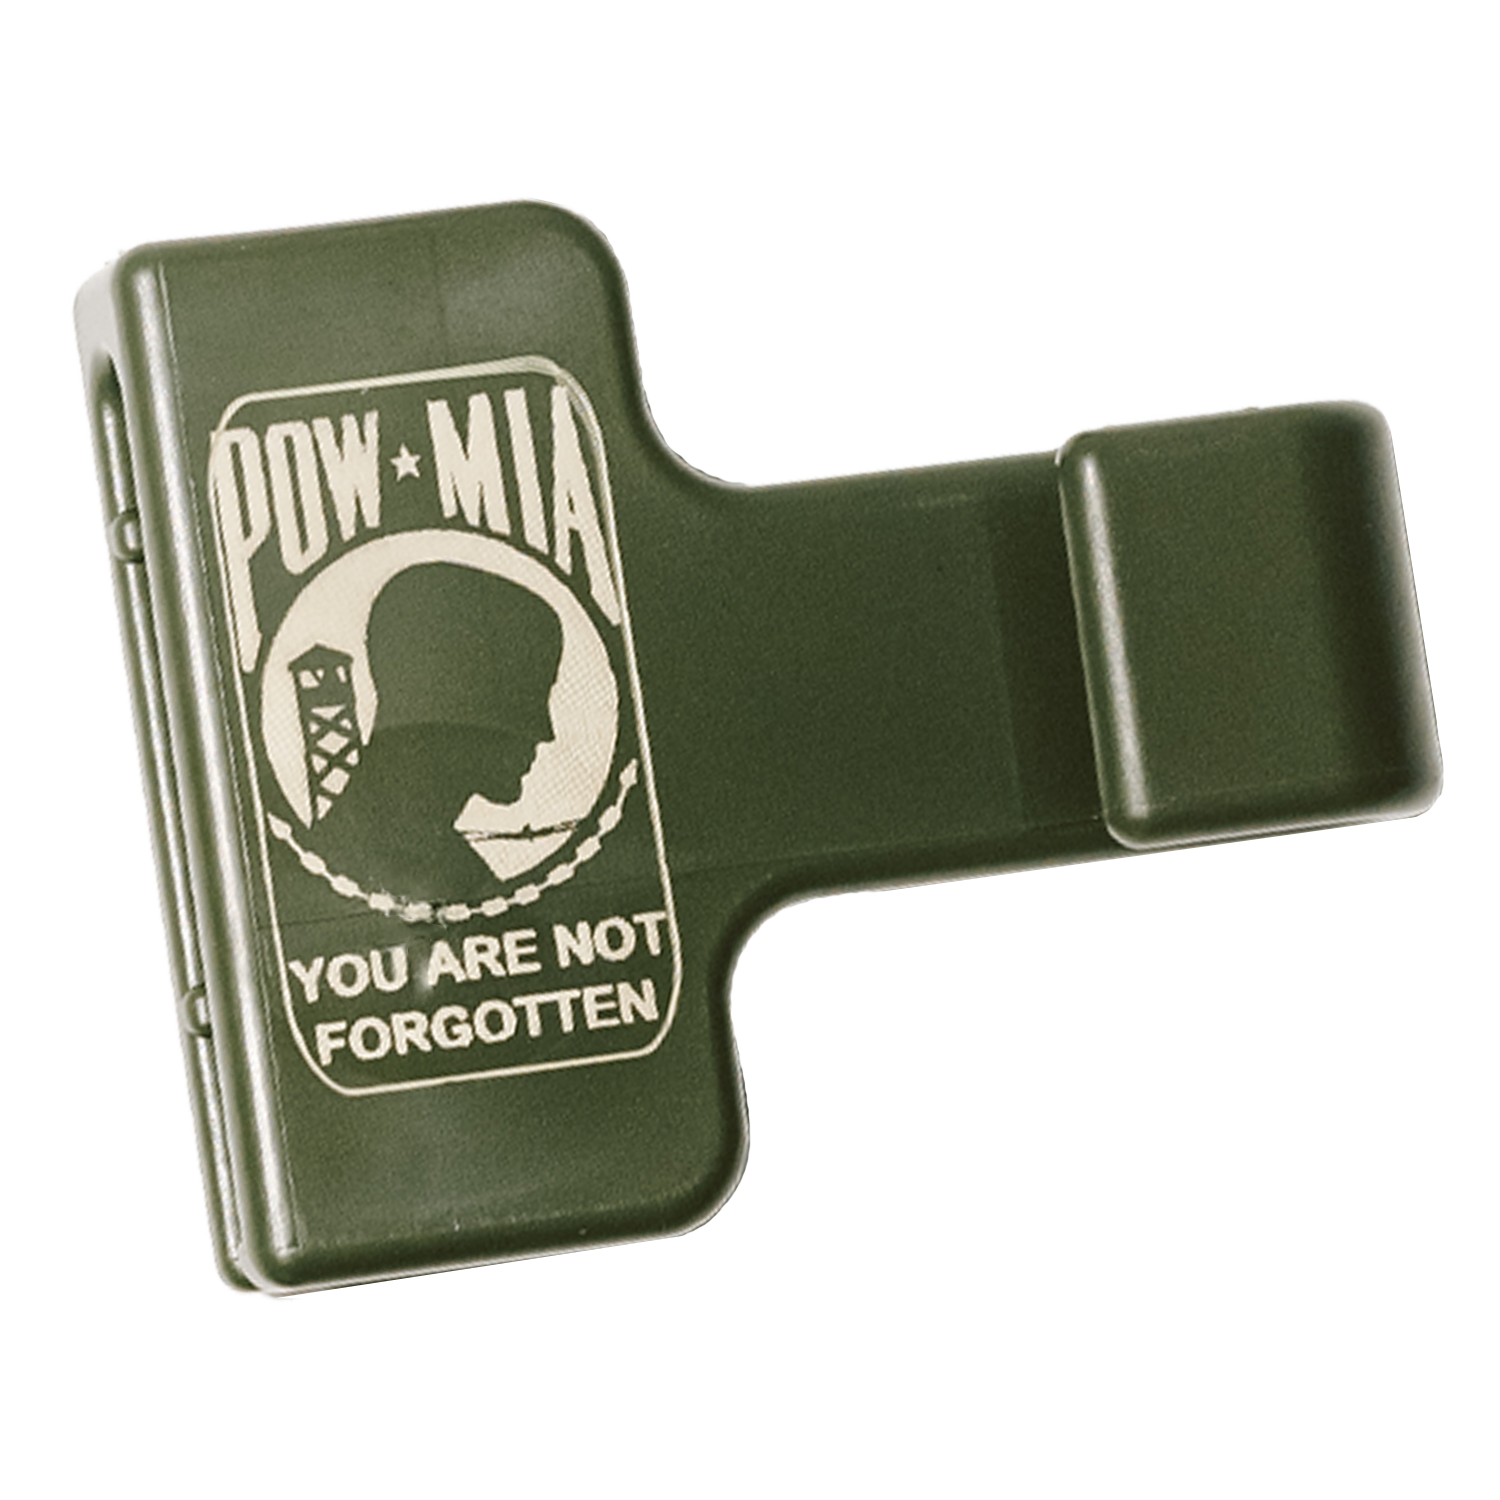 SPECIAL EDITION - POW-MIA CarryKeeper